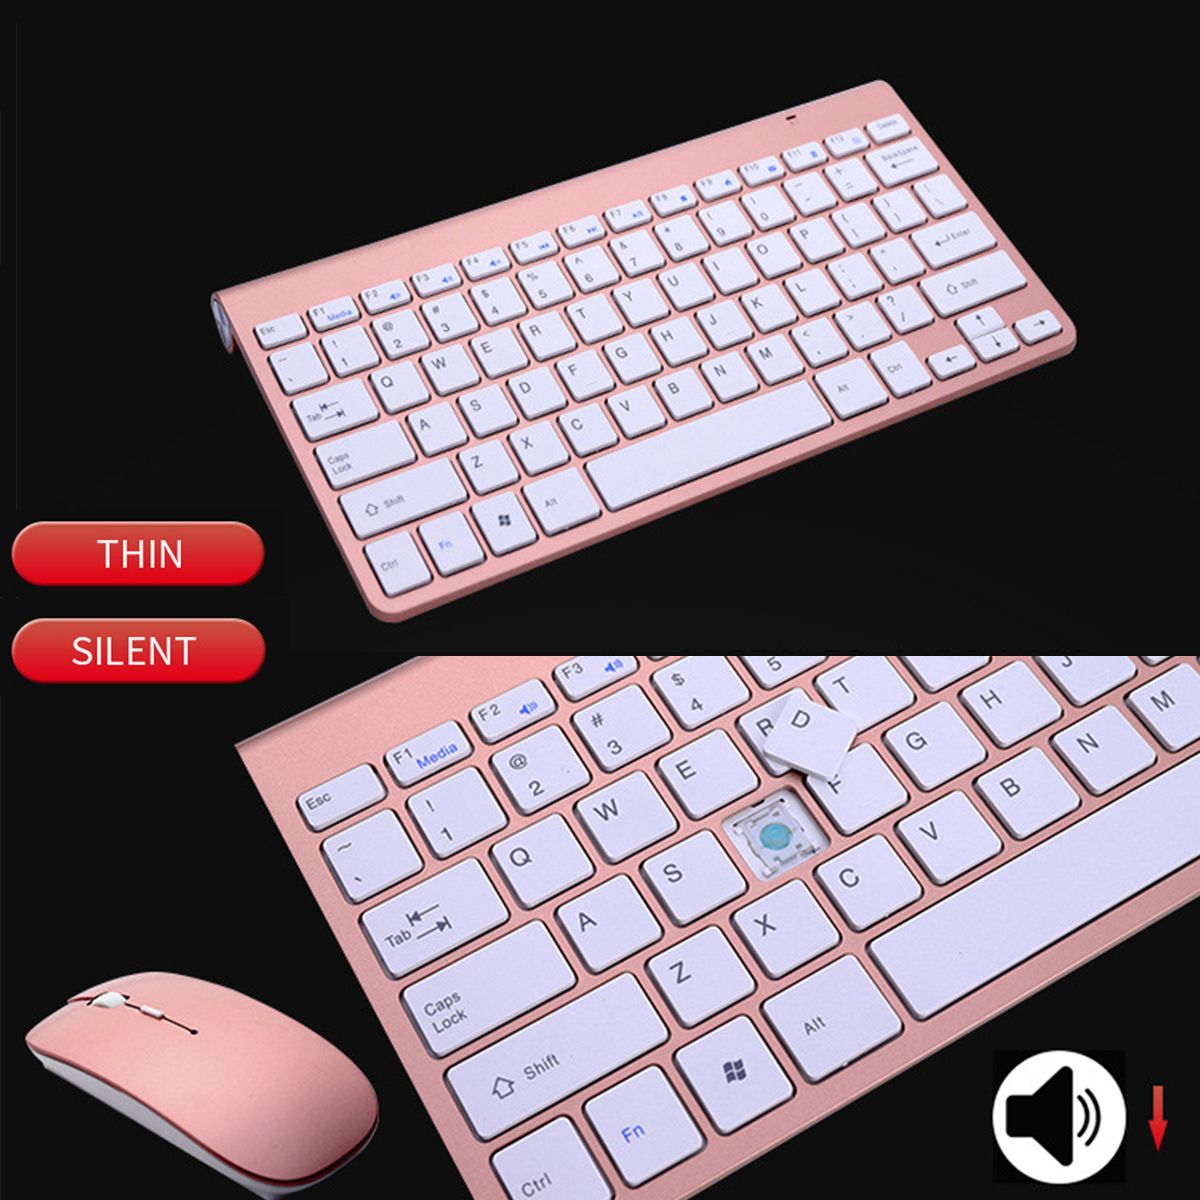 Ultra-Thin-24GHz-Wireless-Keyboard-and-1200DPI-Wireless-Ultra-Thin-Mouse-Combo-Set-with-USB-Receiver-1660852